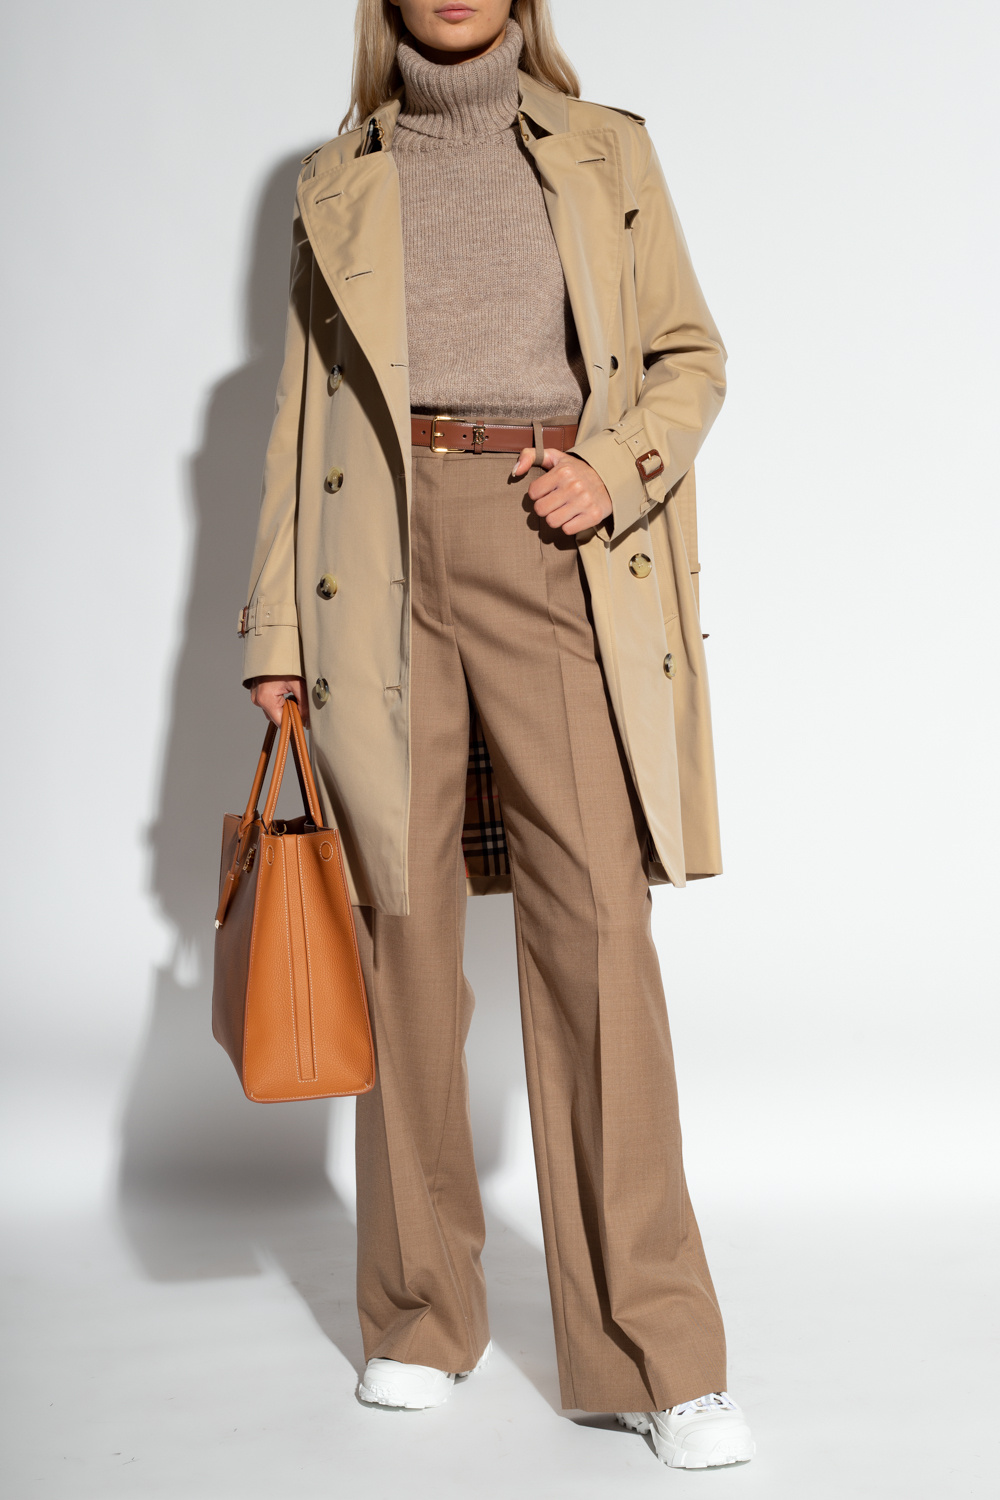 Burberry ‘Jane’ pleat-front trousers